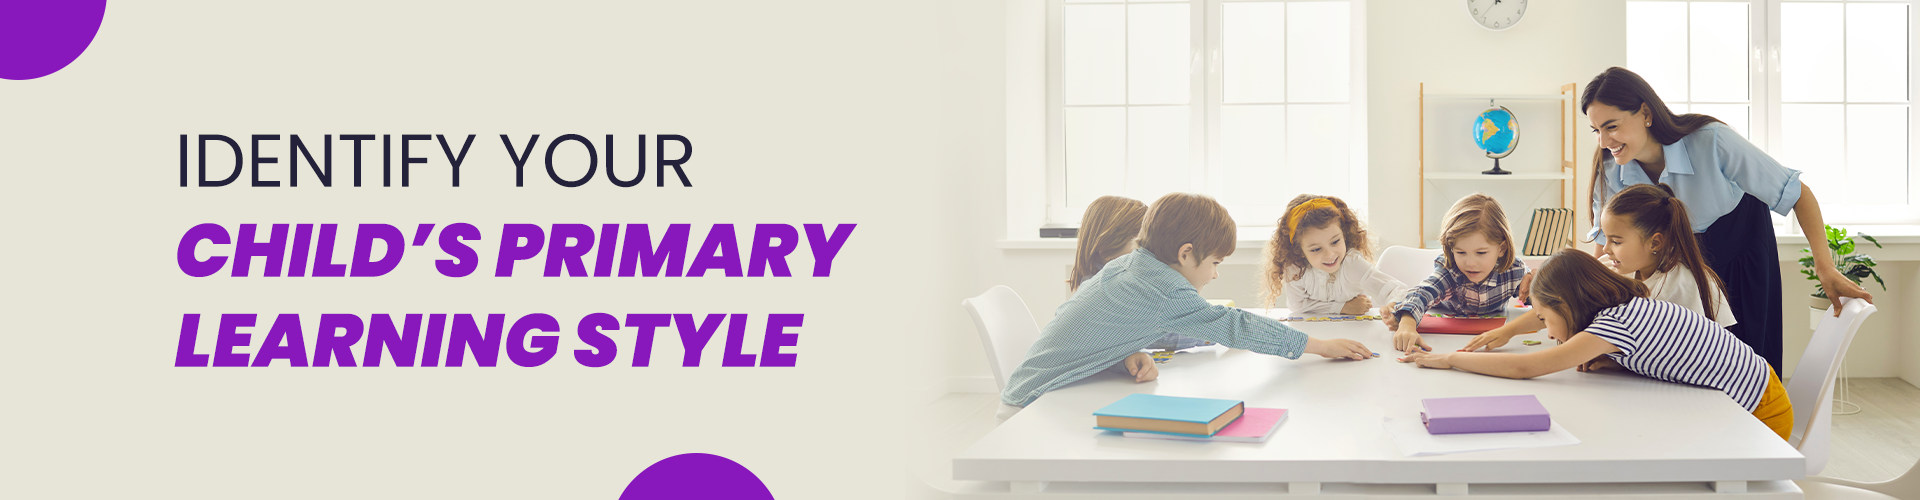 Identify Your Childs Primary Learning Style